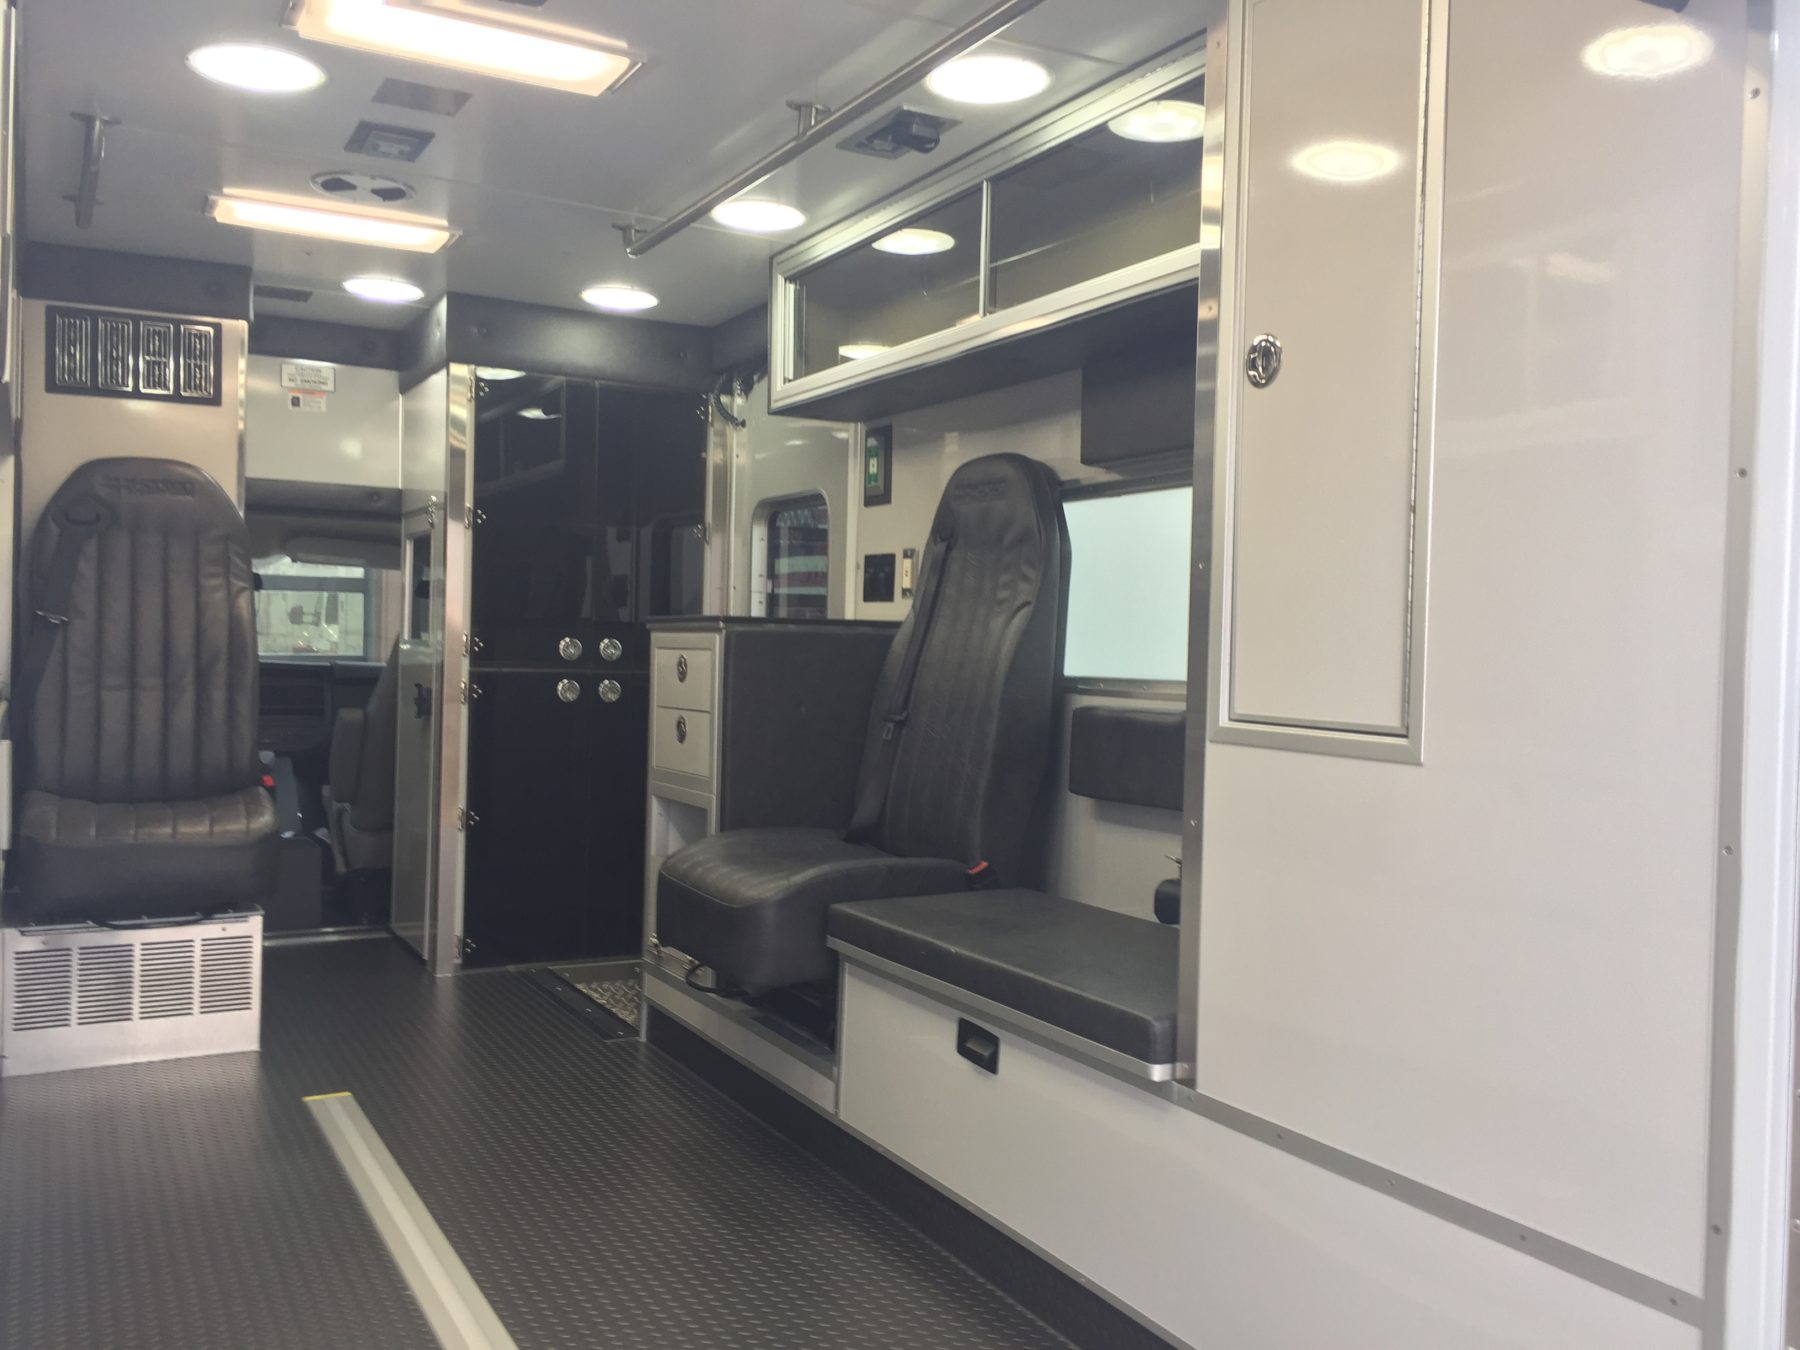 2019 Chevrolet G4500 Type 3 Ambulance For Sale – Picture 13